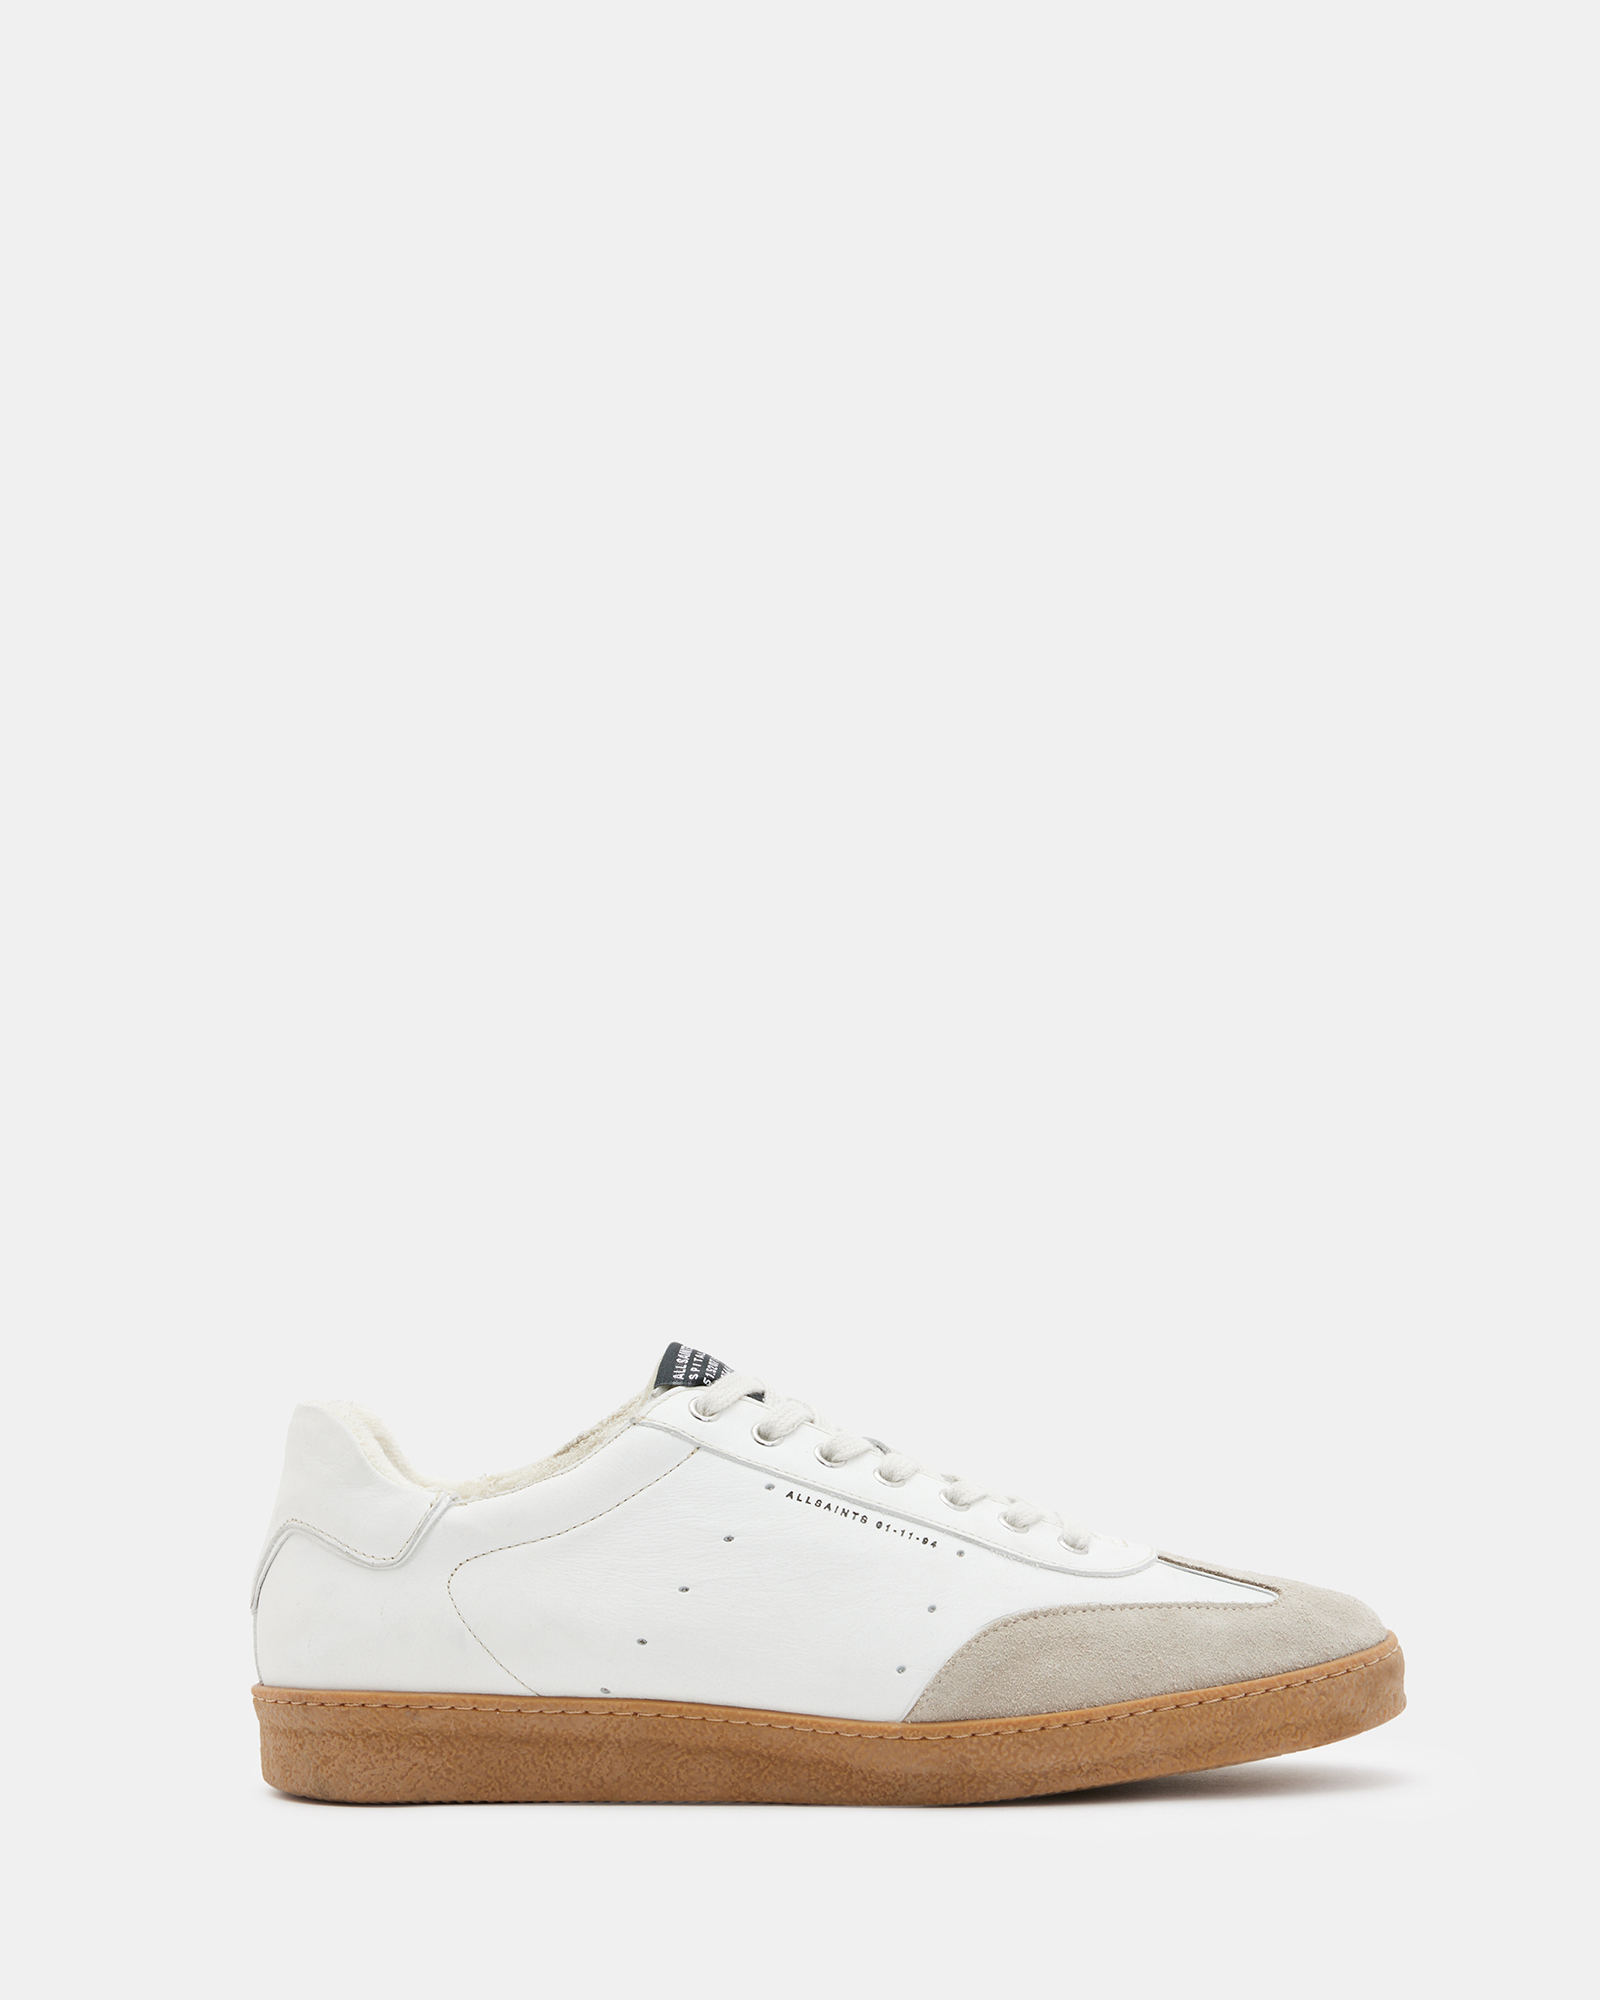 AllSaints Leo Low Top Leather Trainers,, WHITE/SAND